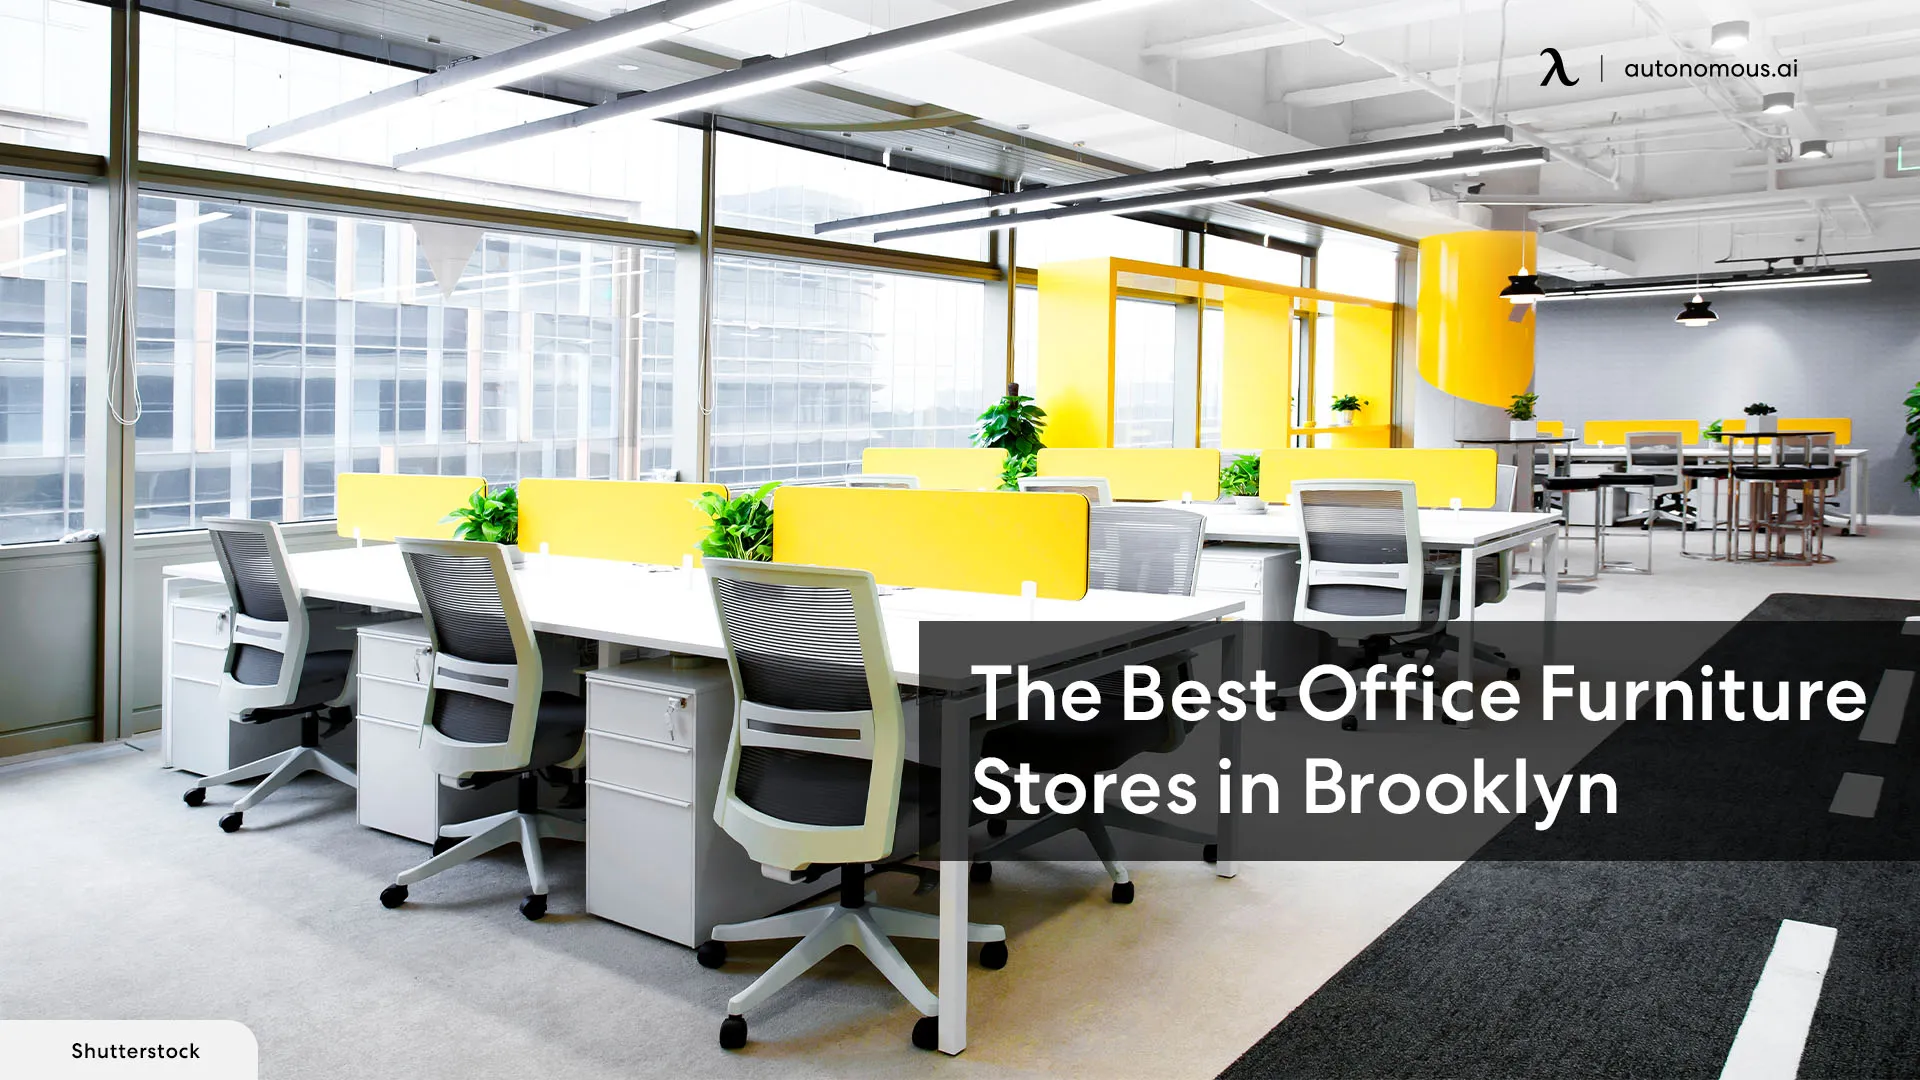 The Best Office Furniture Stores in Brooklyn, NY